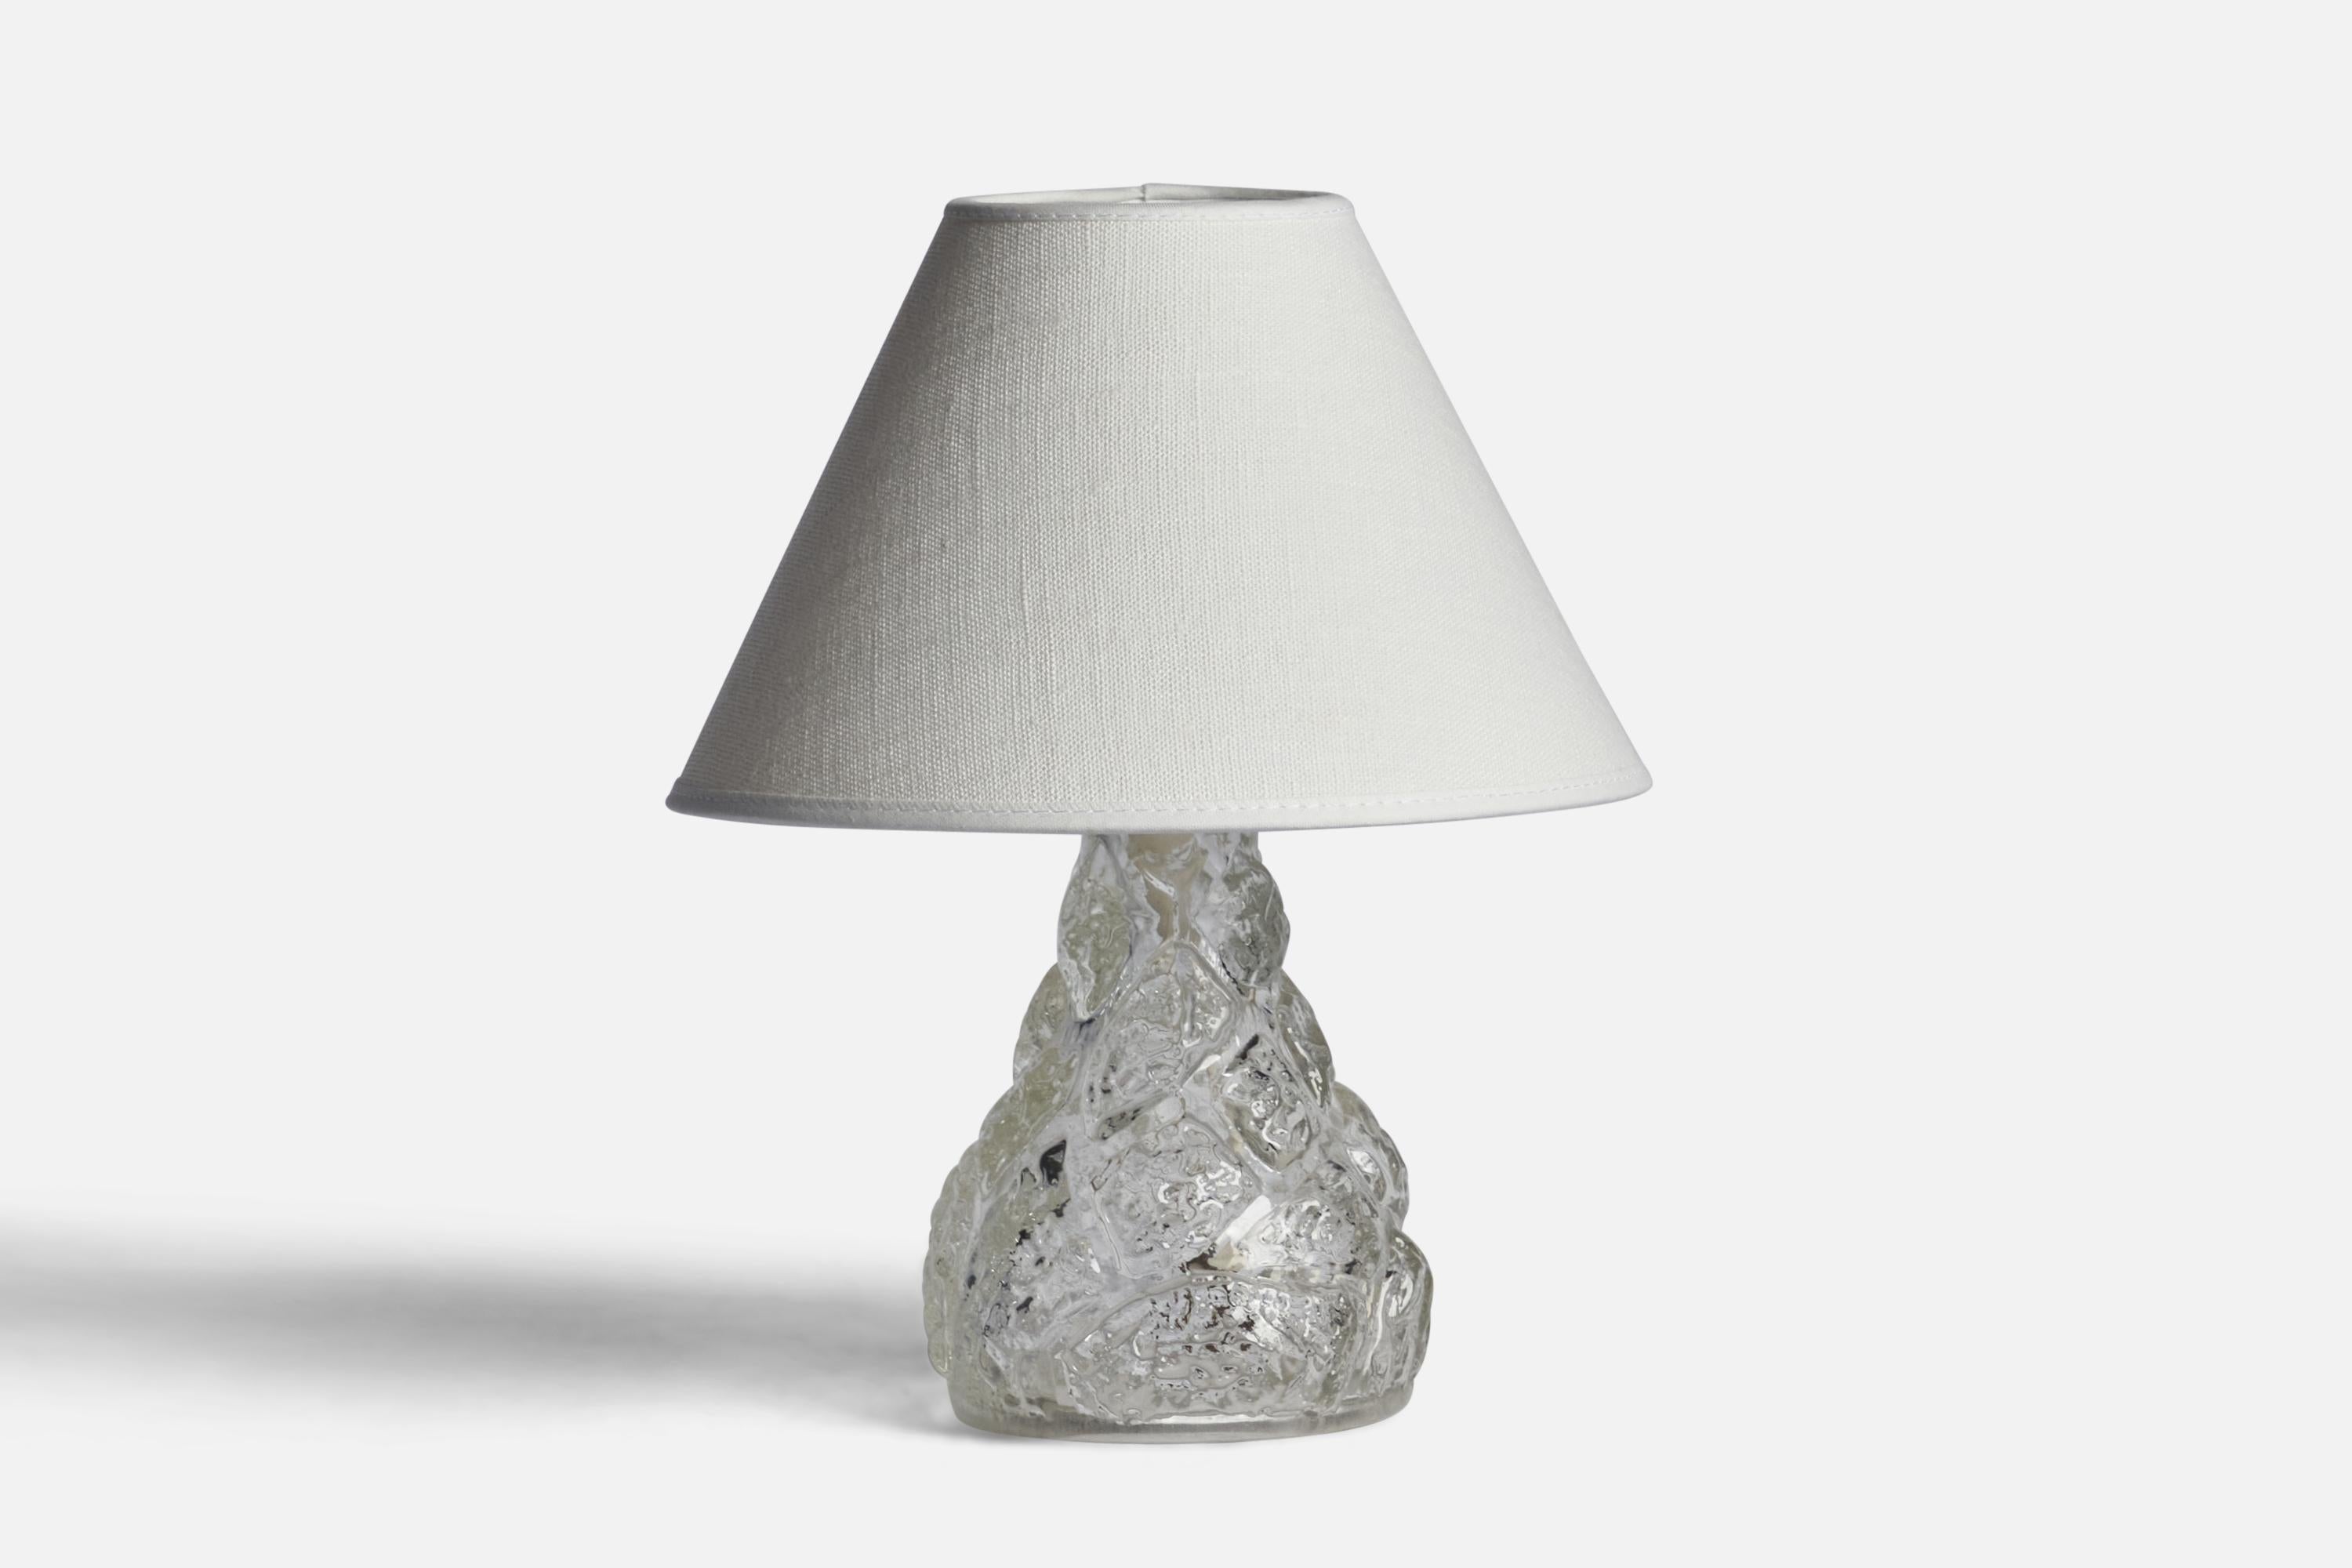 A freeform glass table lamp designed and produced in Sweden, 1940s.

Dimensions of Lamp (inches): 7.35” H x 4.15” Diameter
Dimensions of Shade (inches): 3” Top Diameter x 8” Bottom Diameter x 5” H 
Dimensions of Lamp with Shade (inches): 10.15” H x